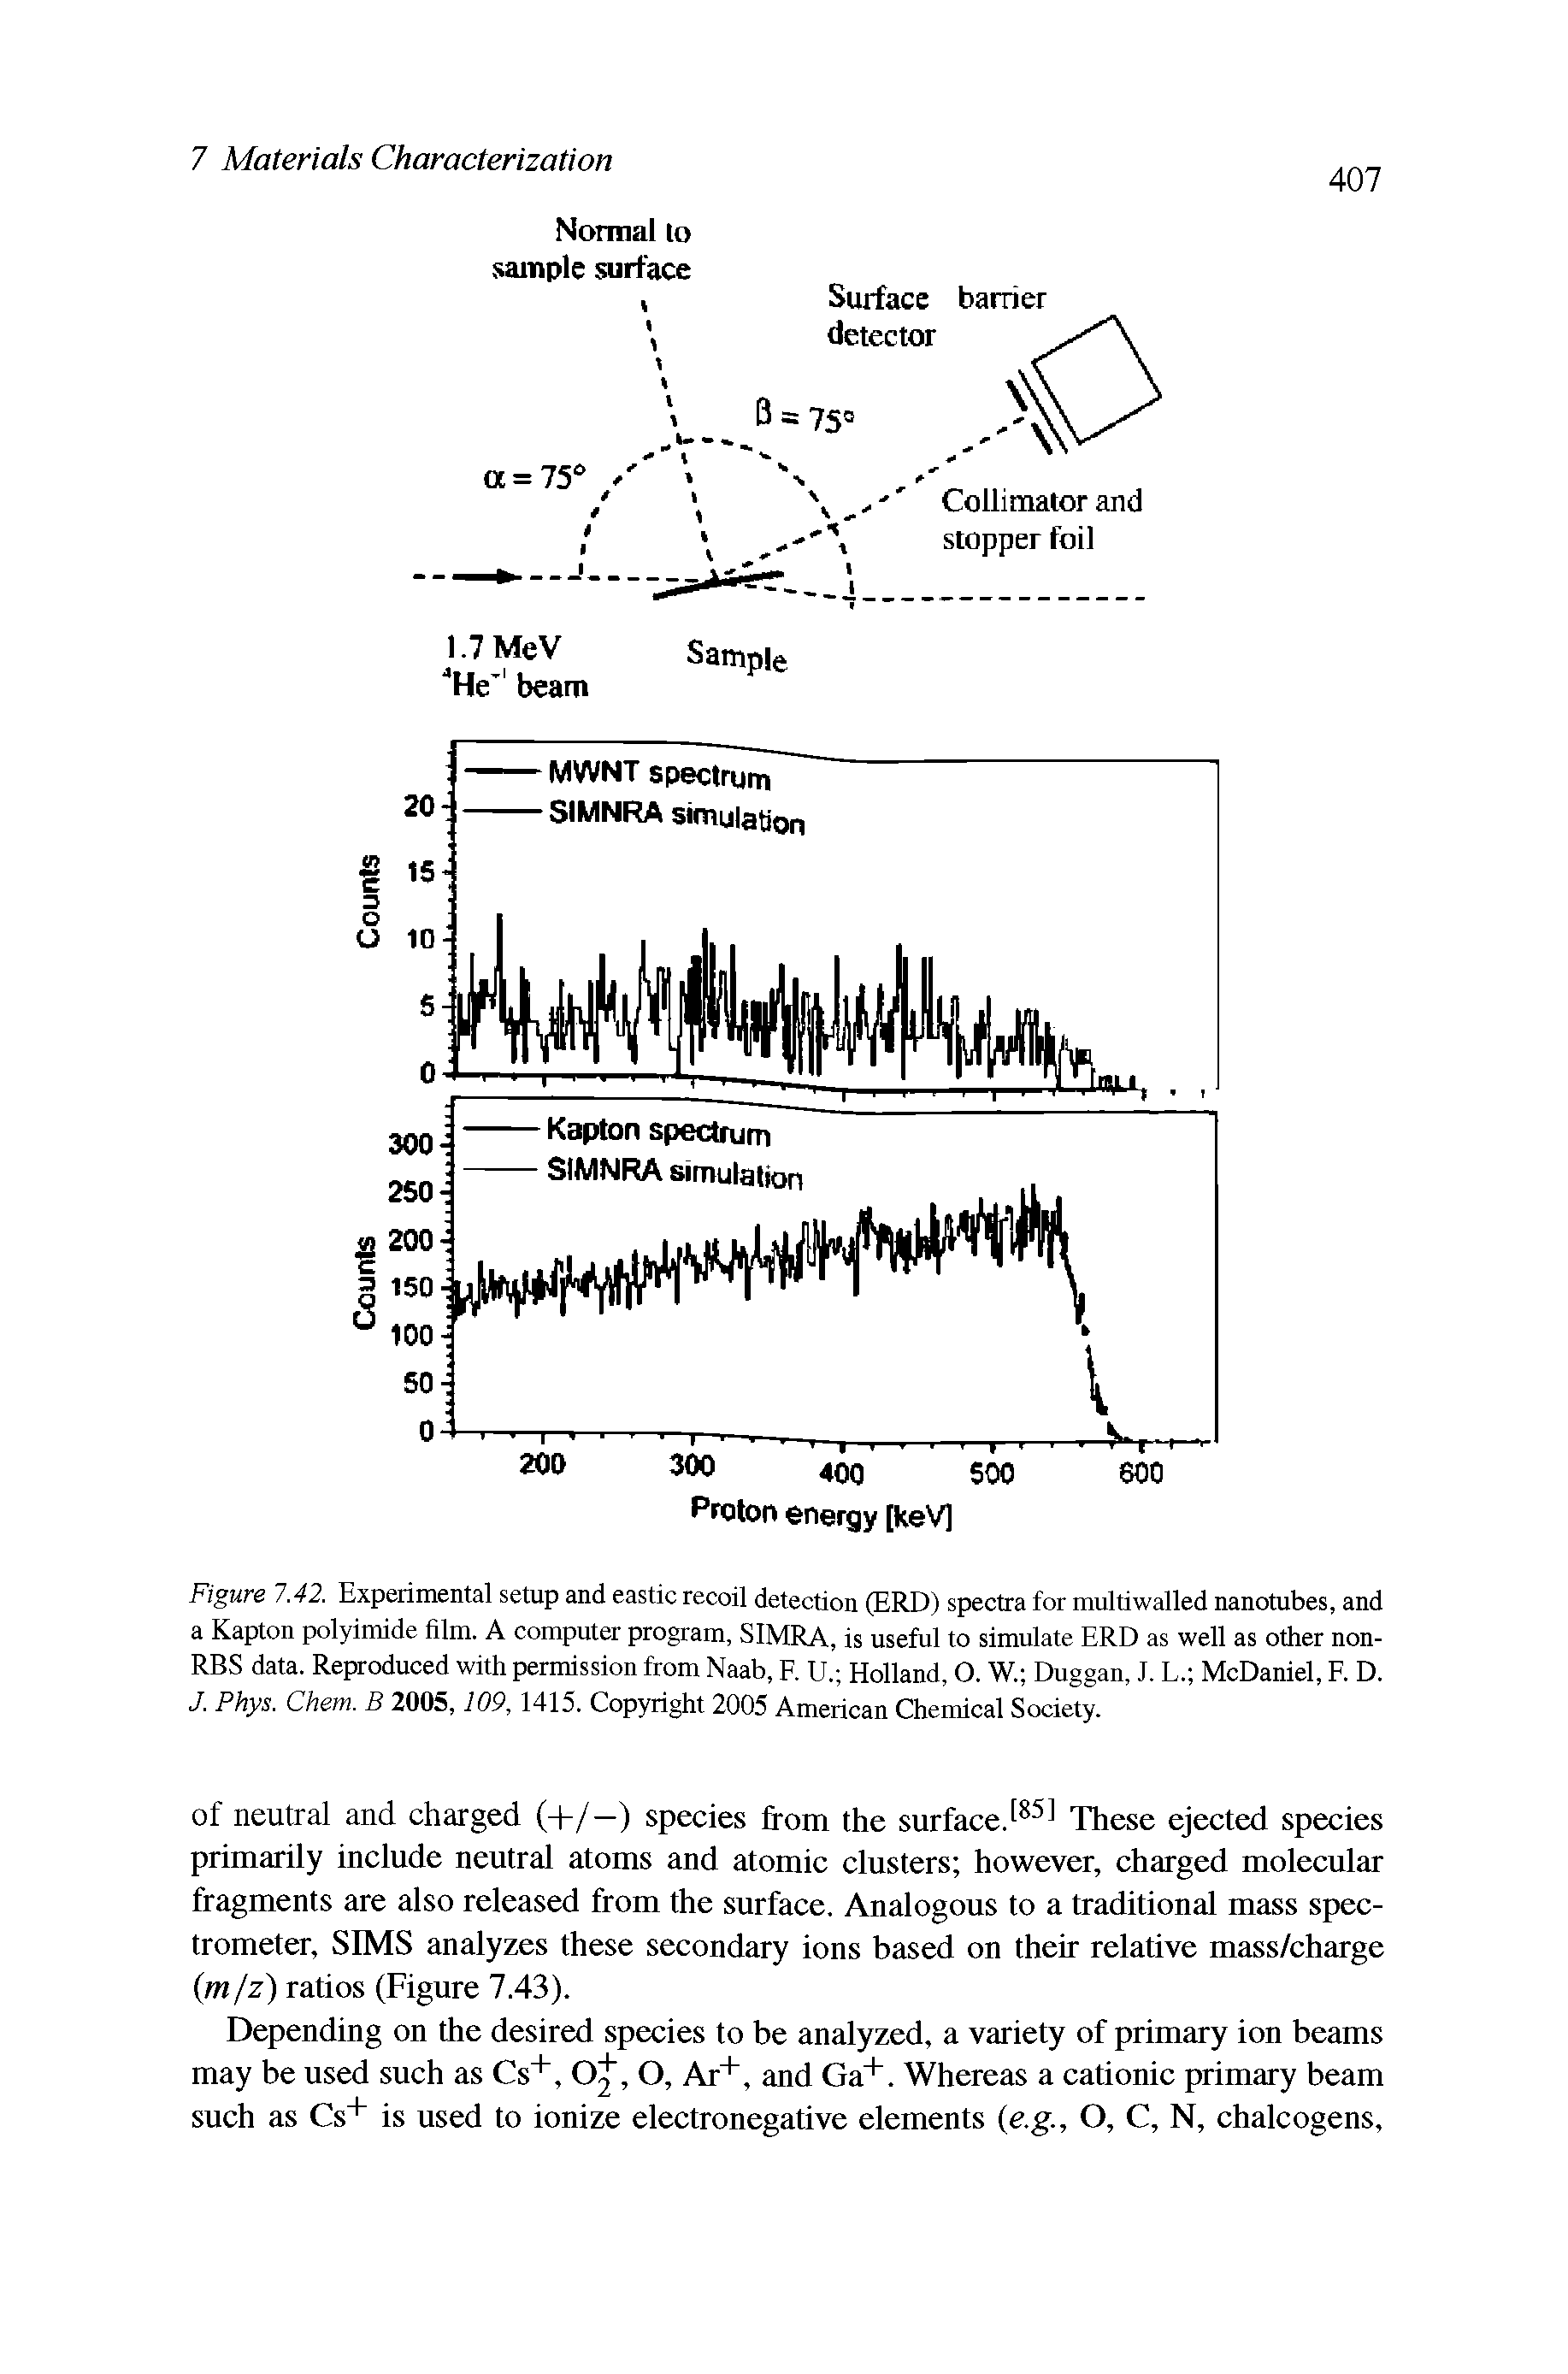 Figure 7.42. Experimental setup and eastic recoil detection (ERD) spectra for multiwalled nanotubes, and a Kapton polyimide film. A computer program, SIMRA, is useful to simulate ERD as well as other non-RBS data. Reproduced with permission from Naab, F. U. Holland, O. W. Duggan, J. L. McDaniel, F. D. J. Phys. Chem. B 2005,109, 1415. Copyright 2005 American Chemical Society.